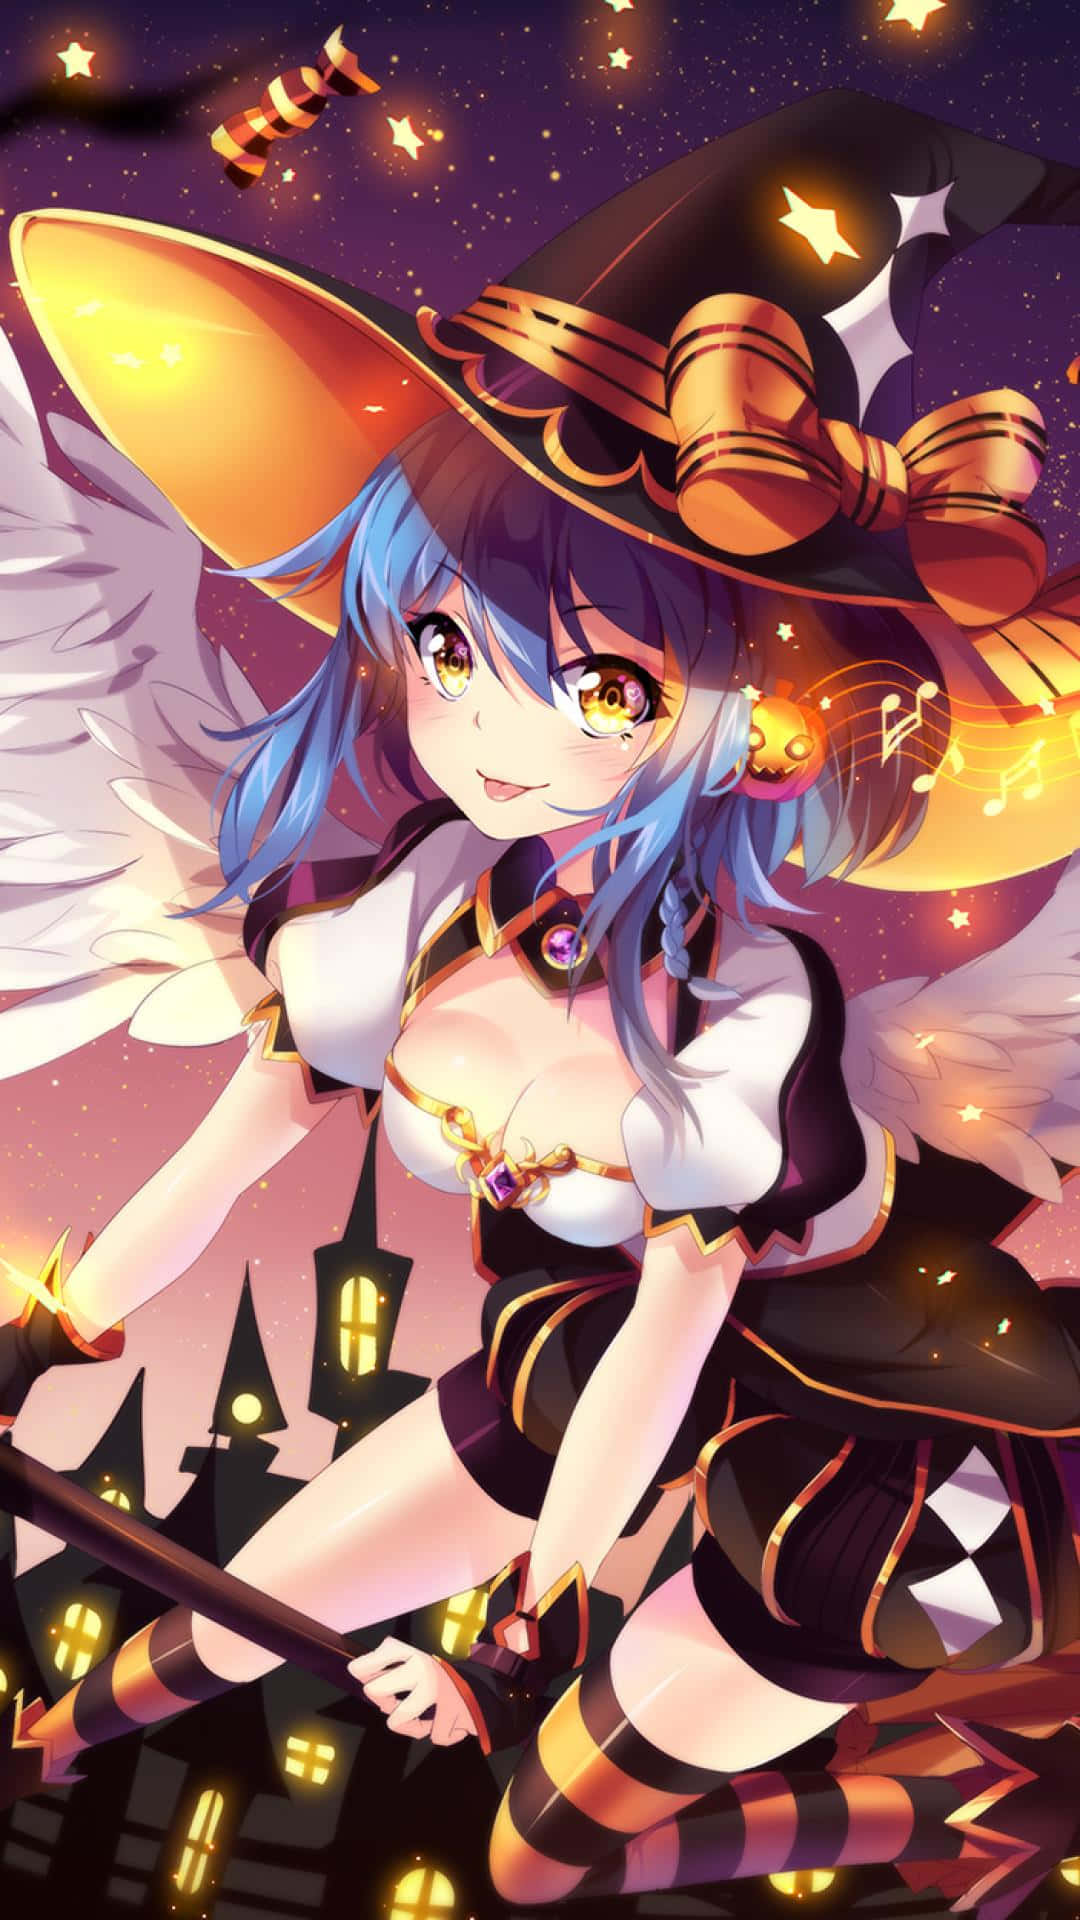 Anime Fans Celebrate Halloween With Epic Art - Anime Herald